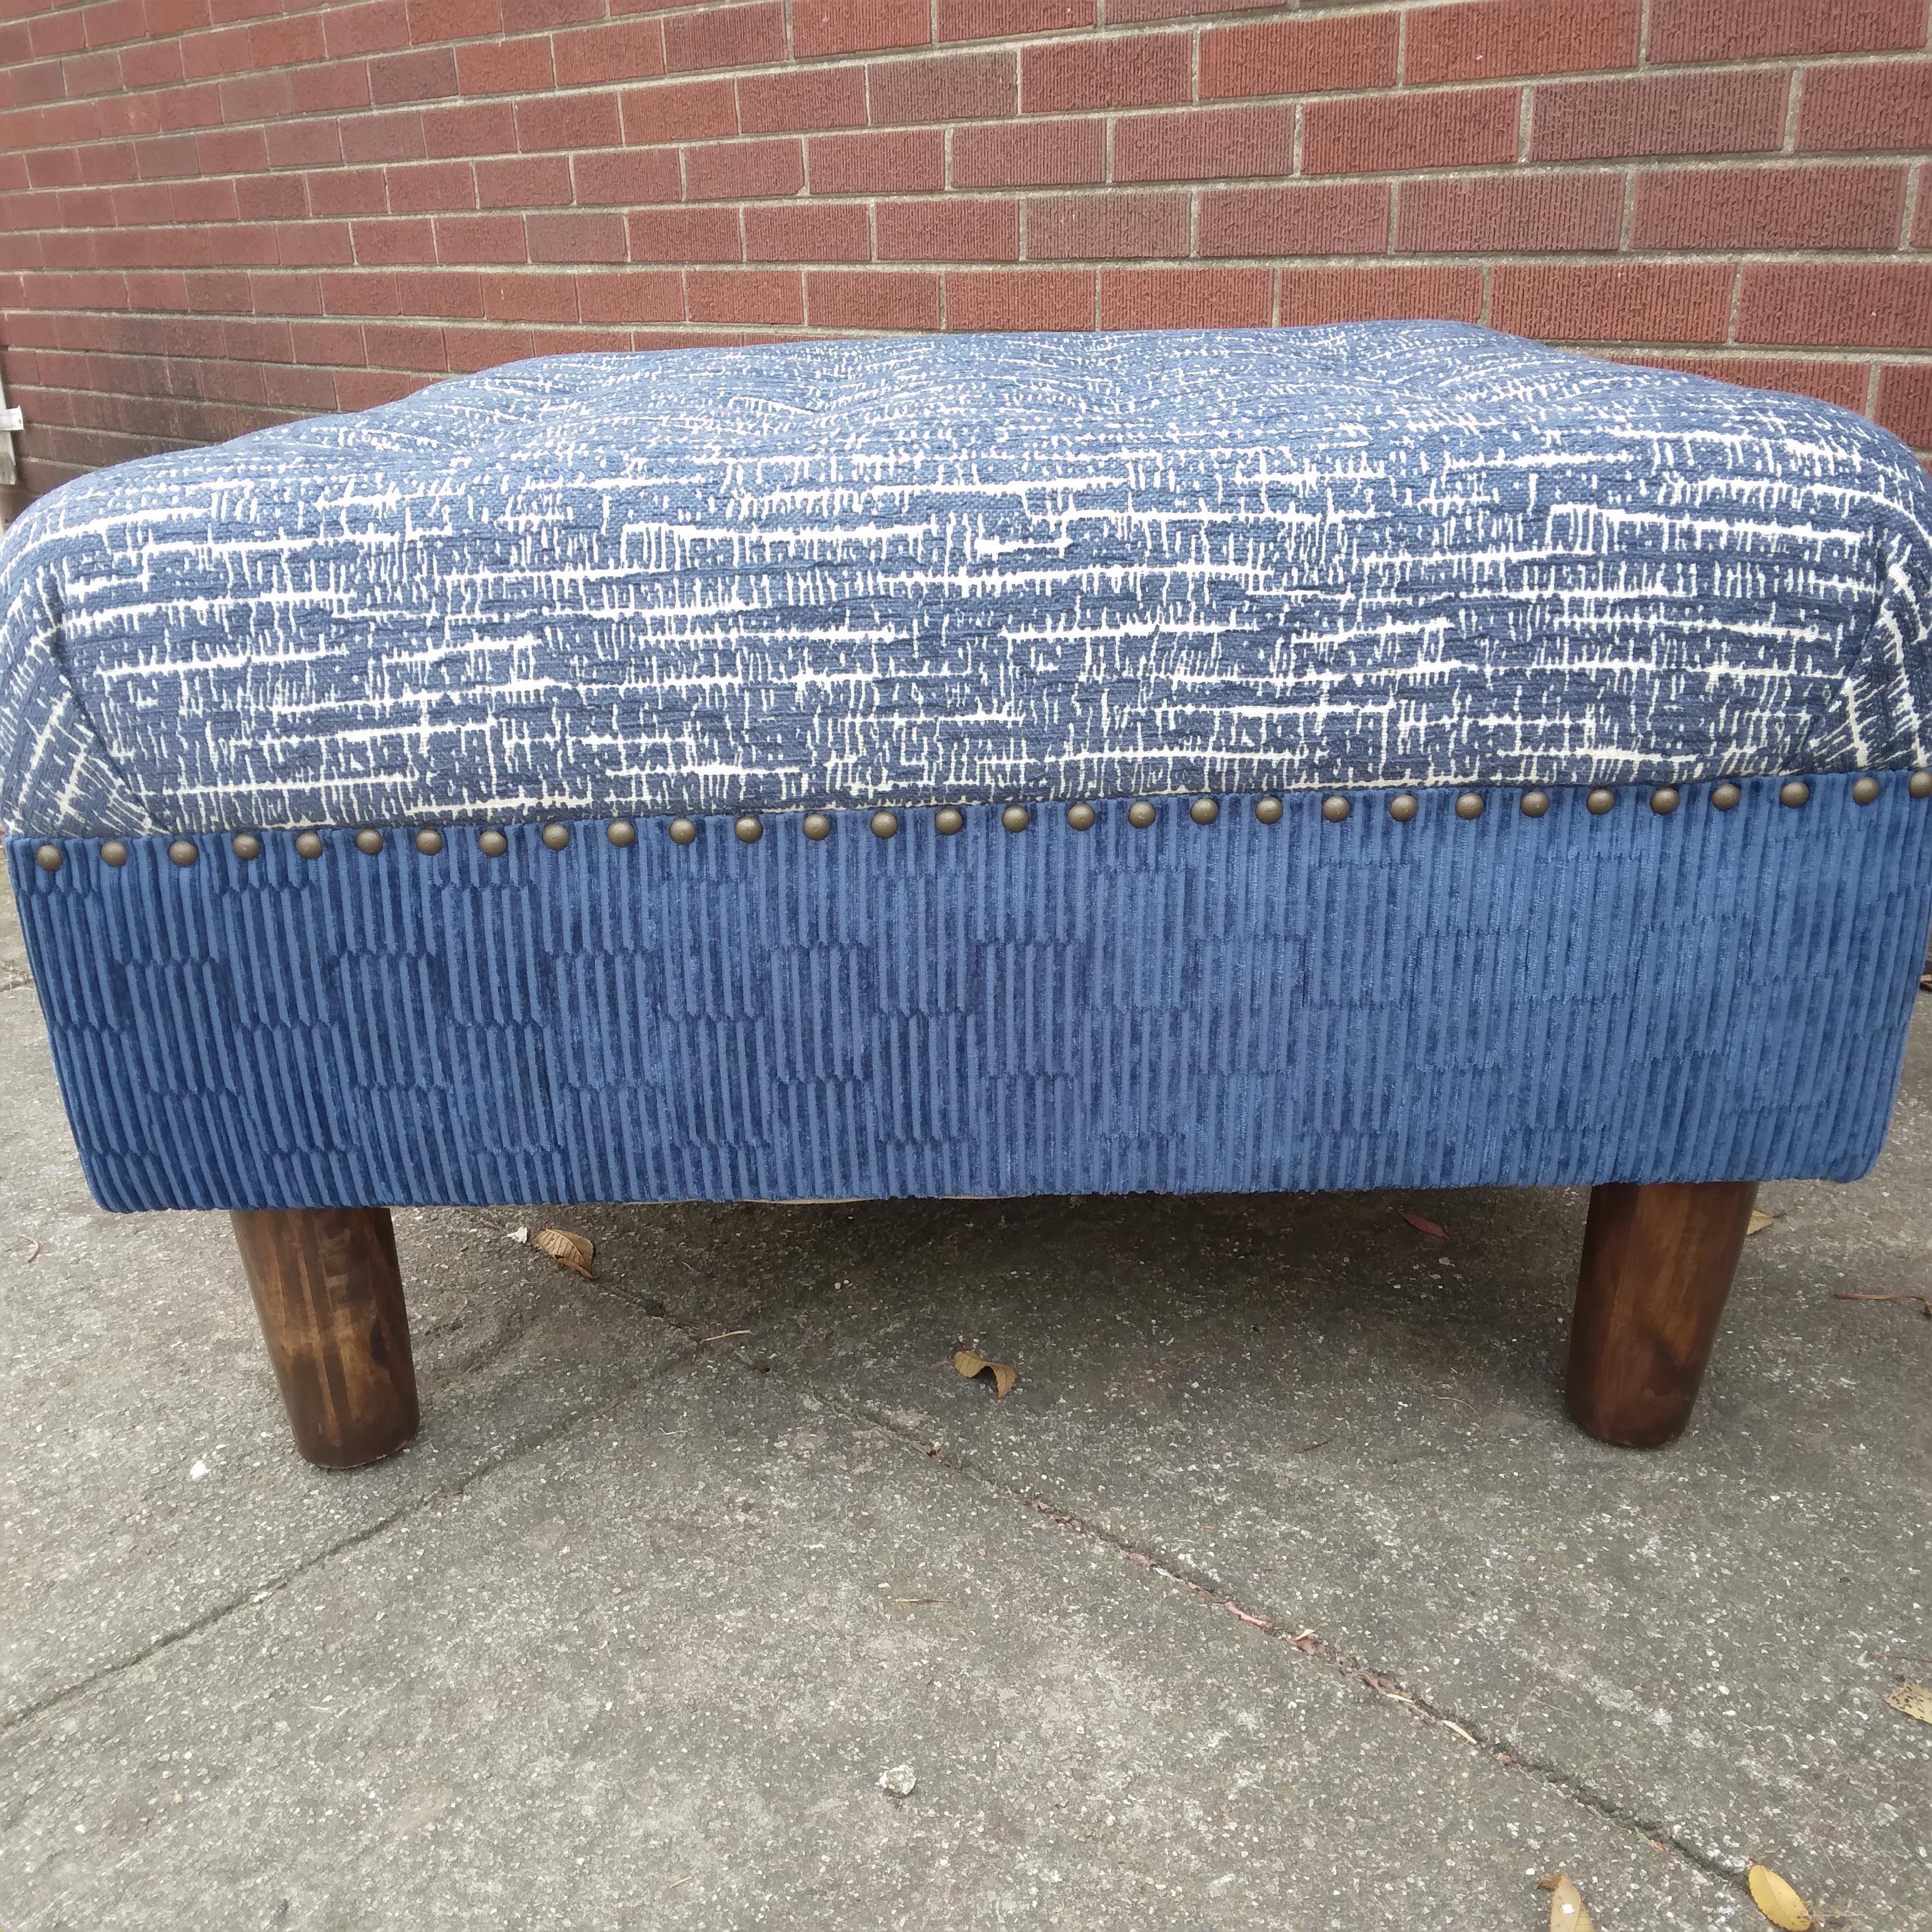 Contemporary Tufted Ottoman in Textured Blue Chenille In Good Condition For Sale In Munster, IN